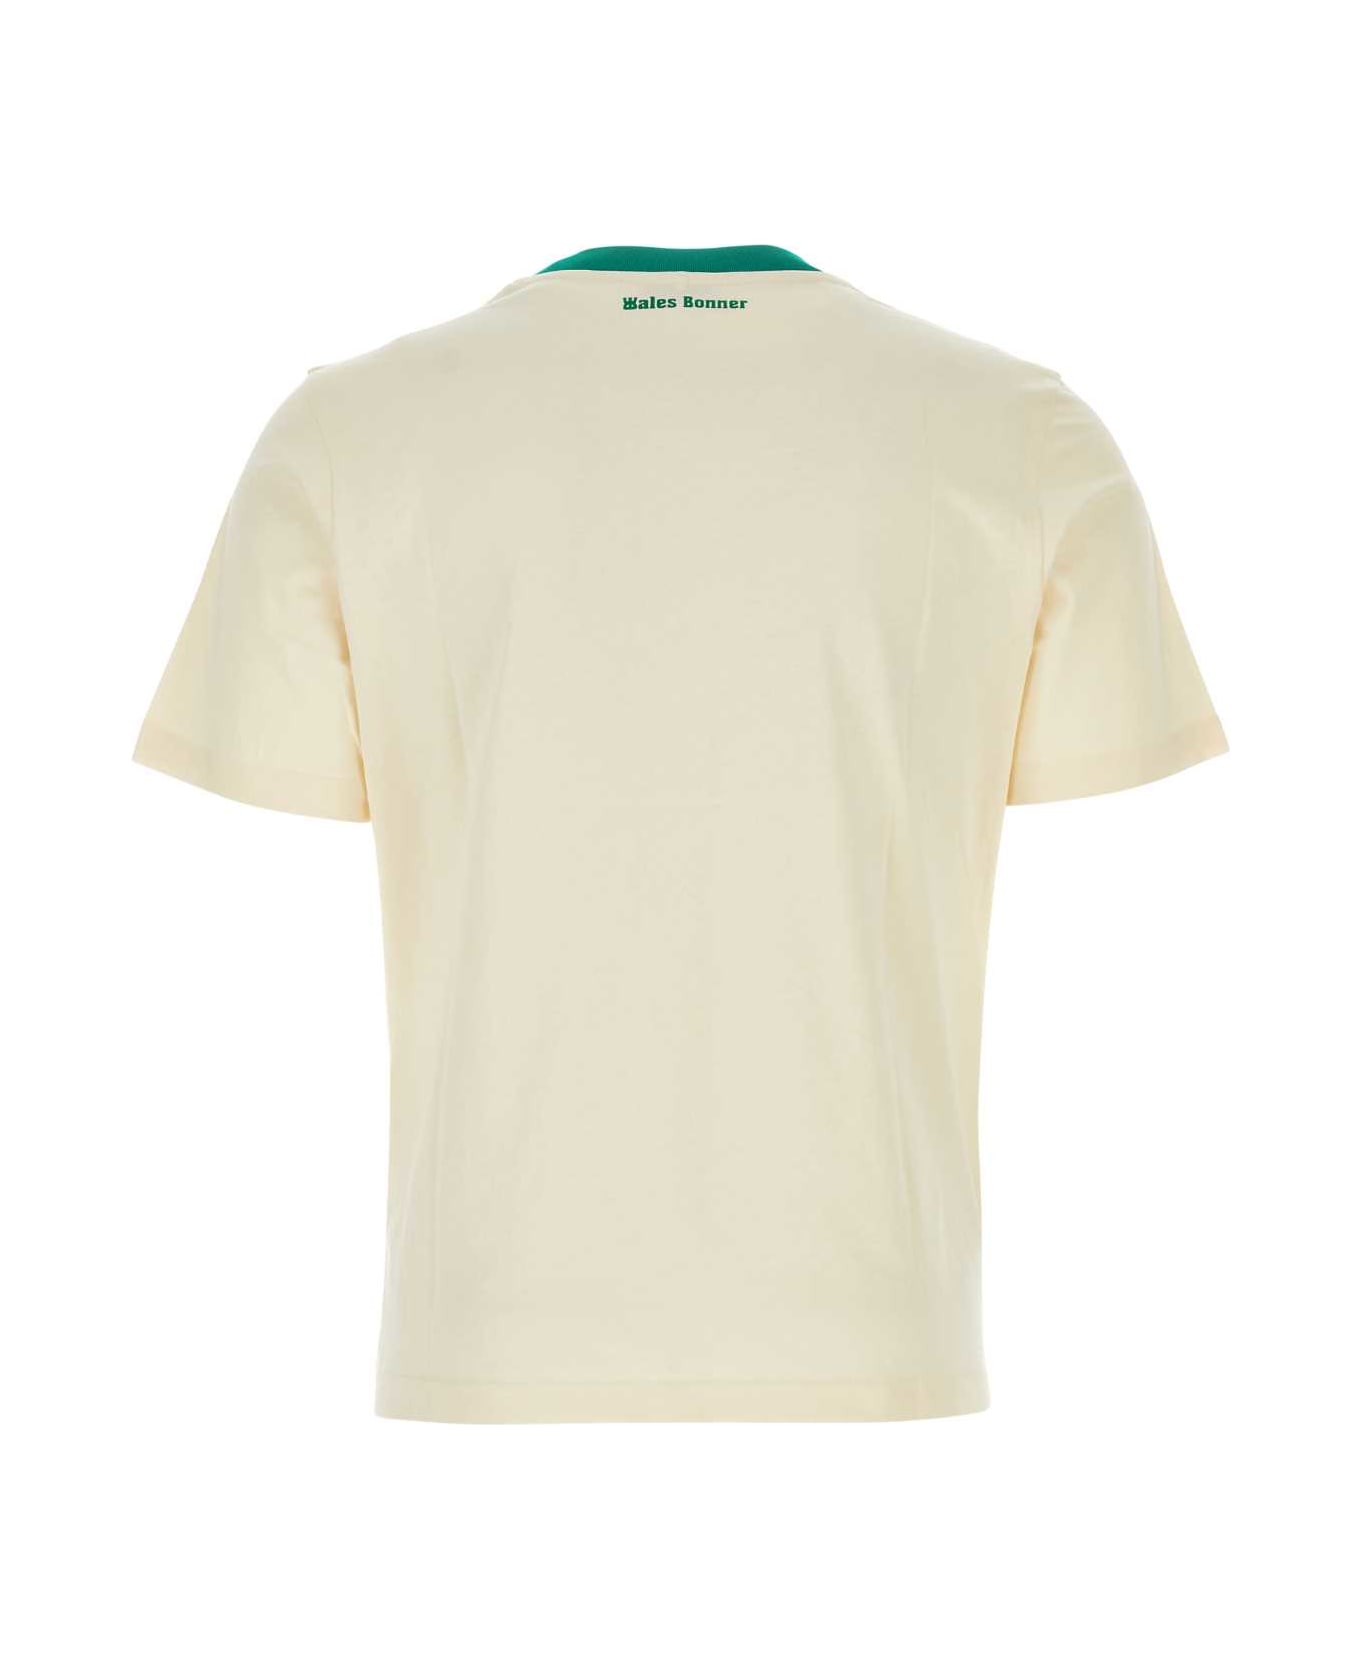 Wales Bonner Cream Cotton Resilience T-shirt - IVORY シャツ